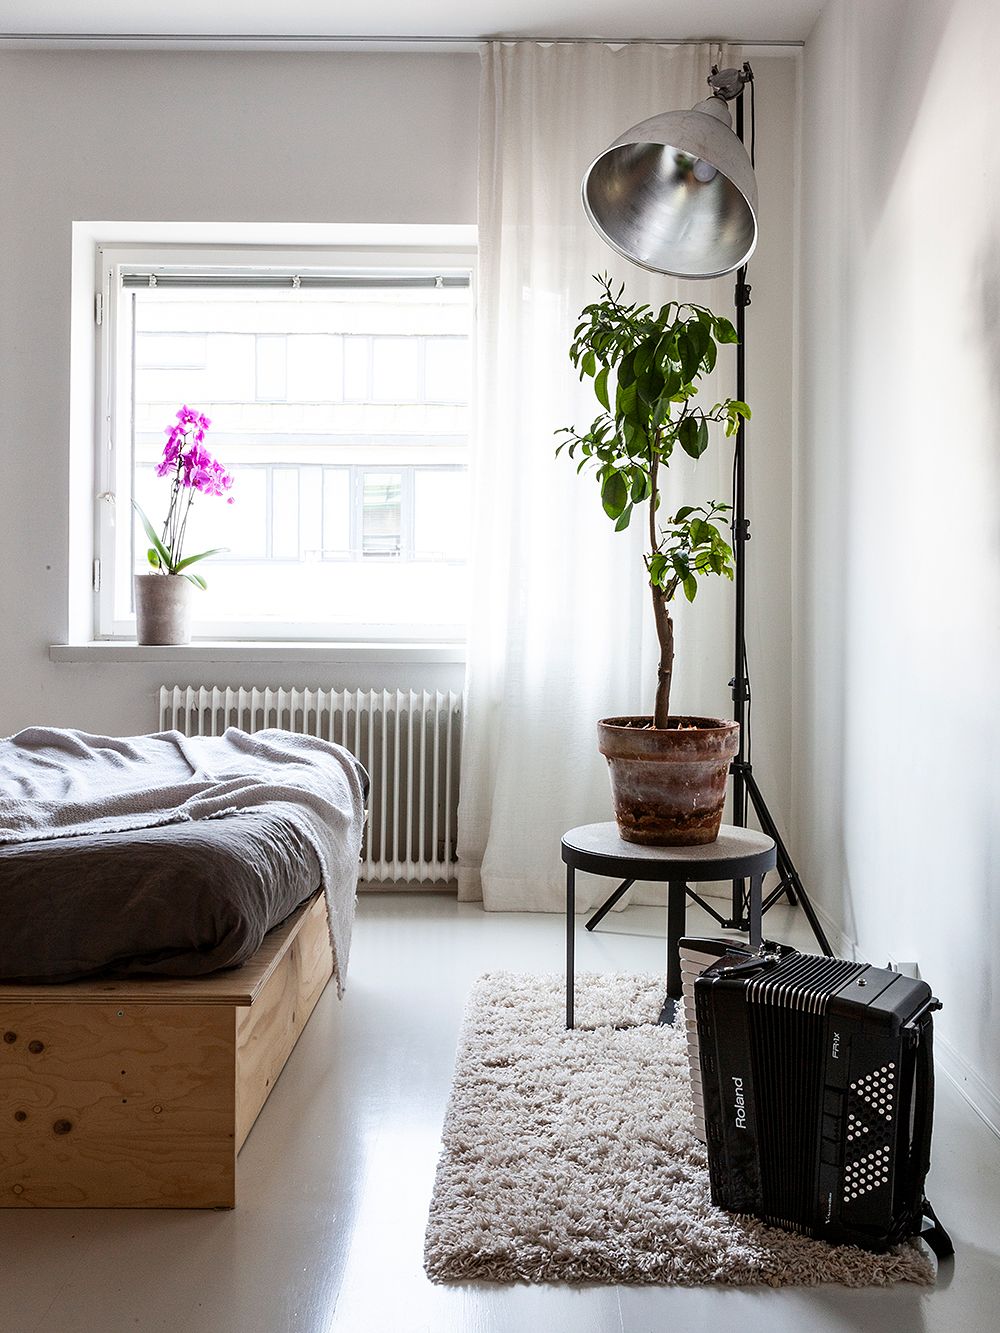 Anni and Heikki renovated a two-bedroom home in Helsinki | Design Stories